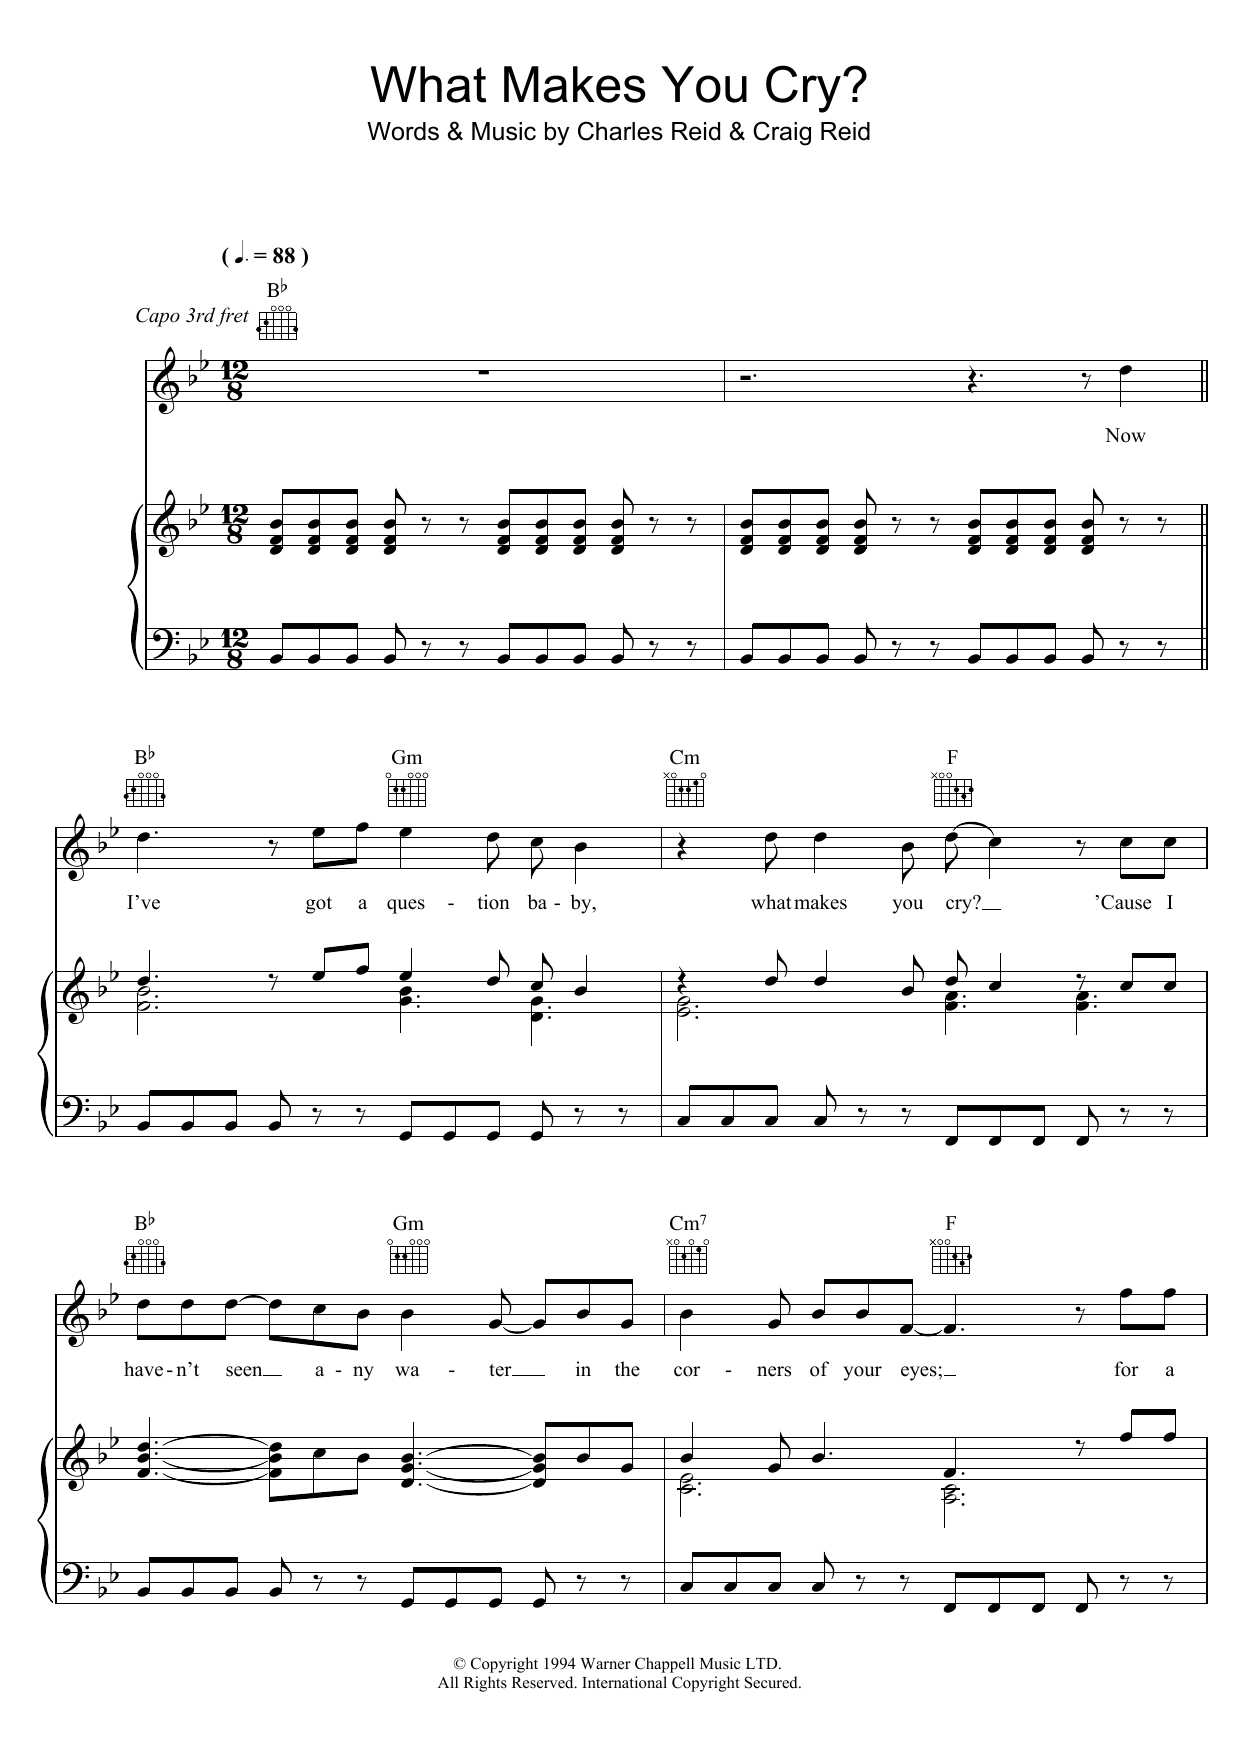 Download The Proclaimers What Makes You Cry Sheet Music